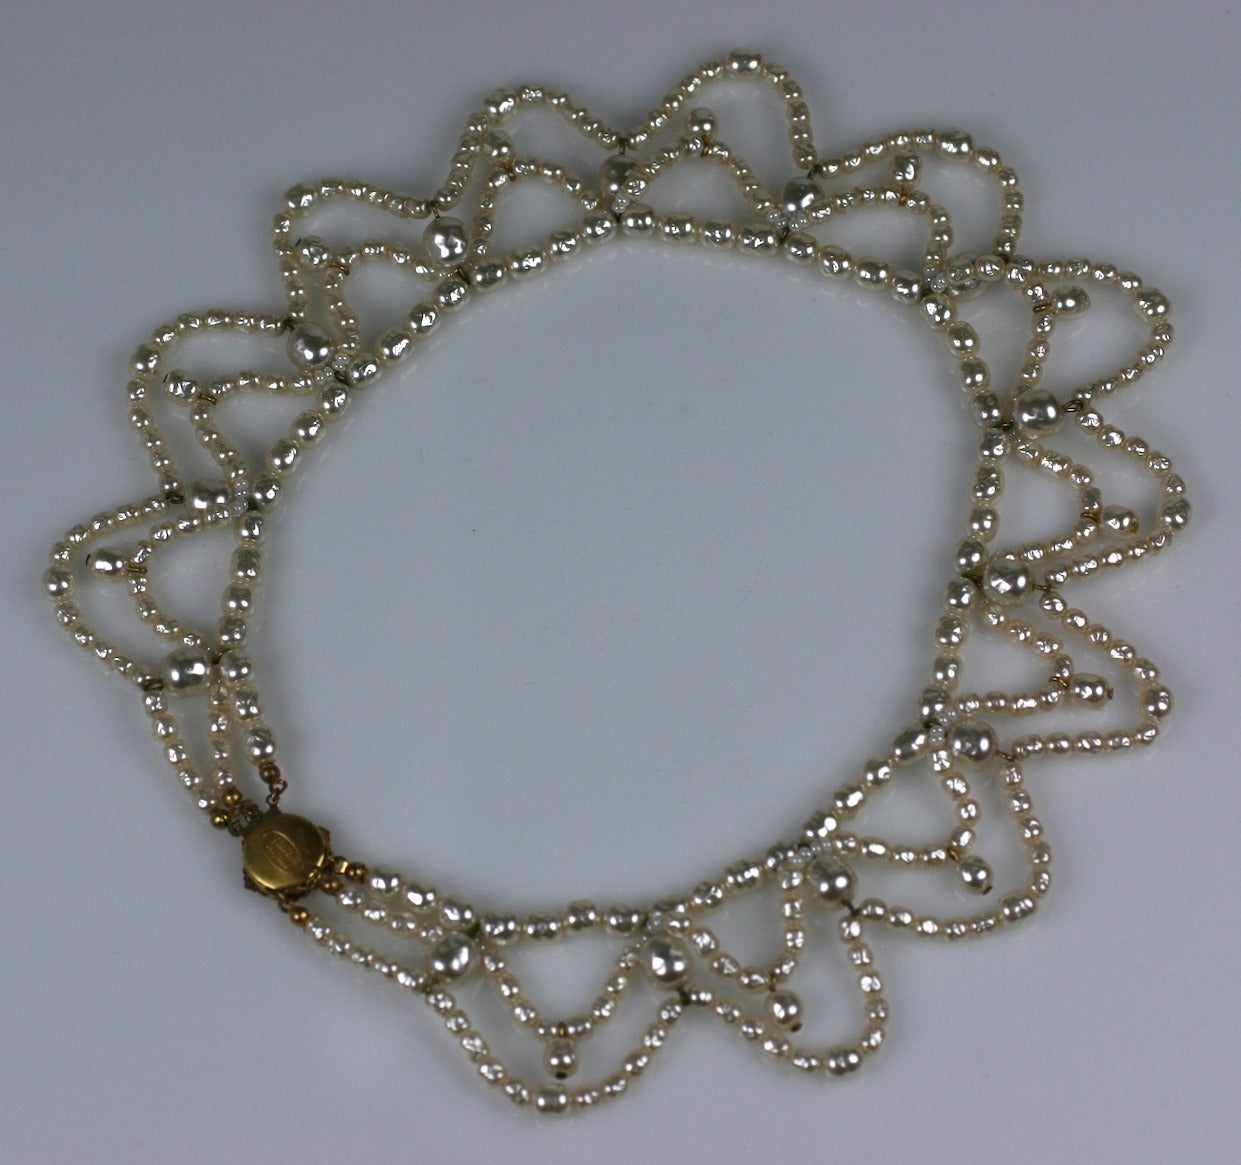 Miriam Haskell's large festoon necklace of swags of creamy baroque pearls and drops all around. Signature Russian gilt filigree clasp. 1950's USA.
Excellent condition. Length 16